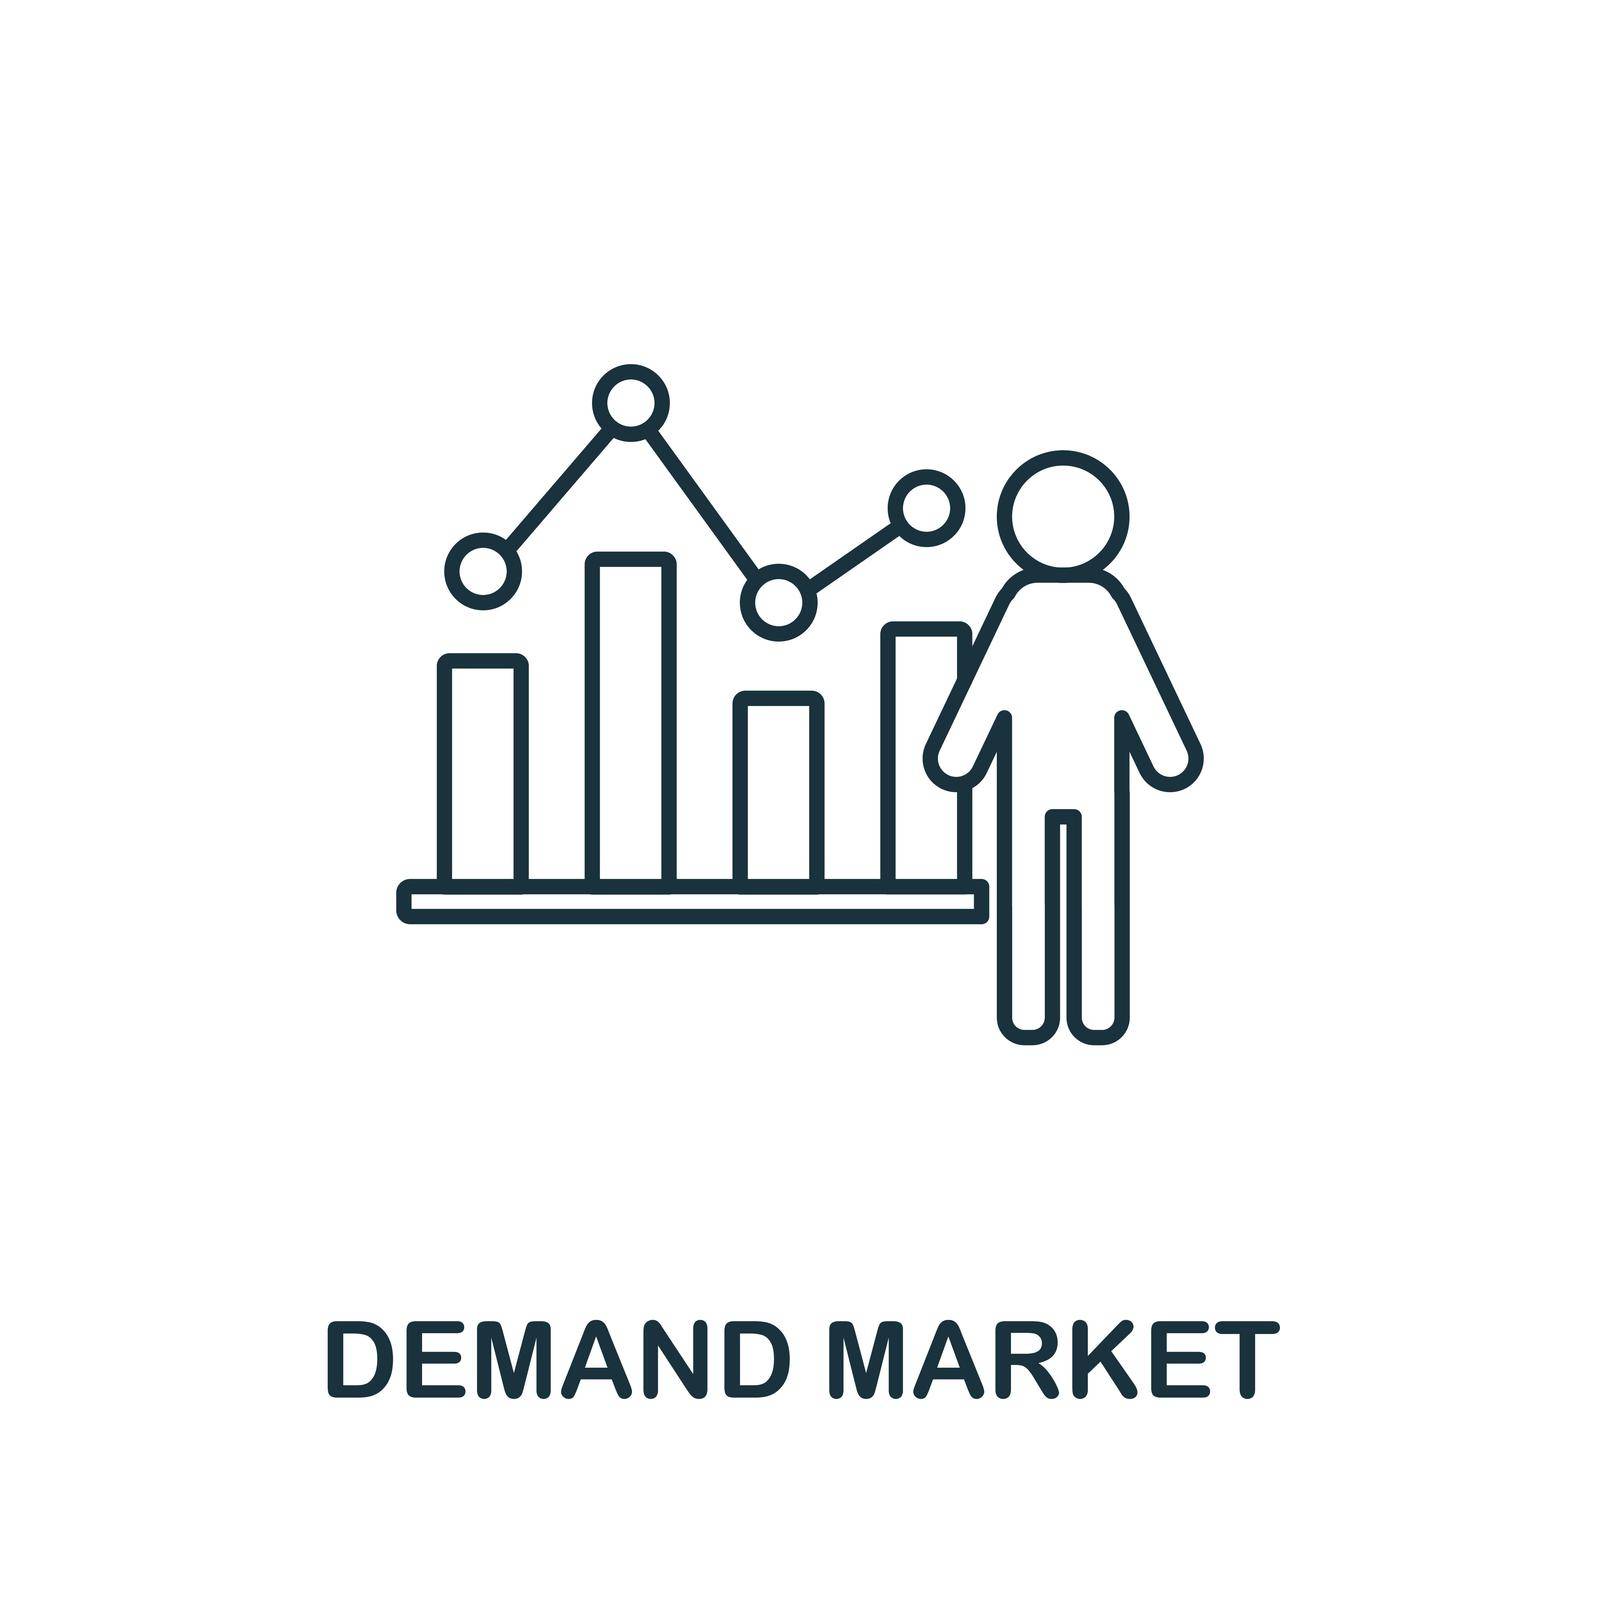 Demand Market icon. Line element from market economy collection. Linear Demand Market icon sign for web design, infographics and more. by simakovavector